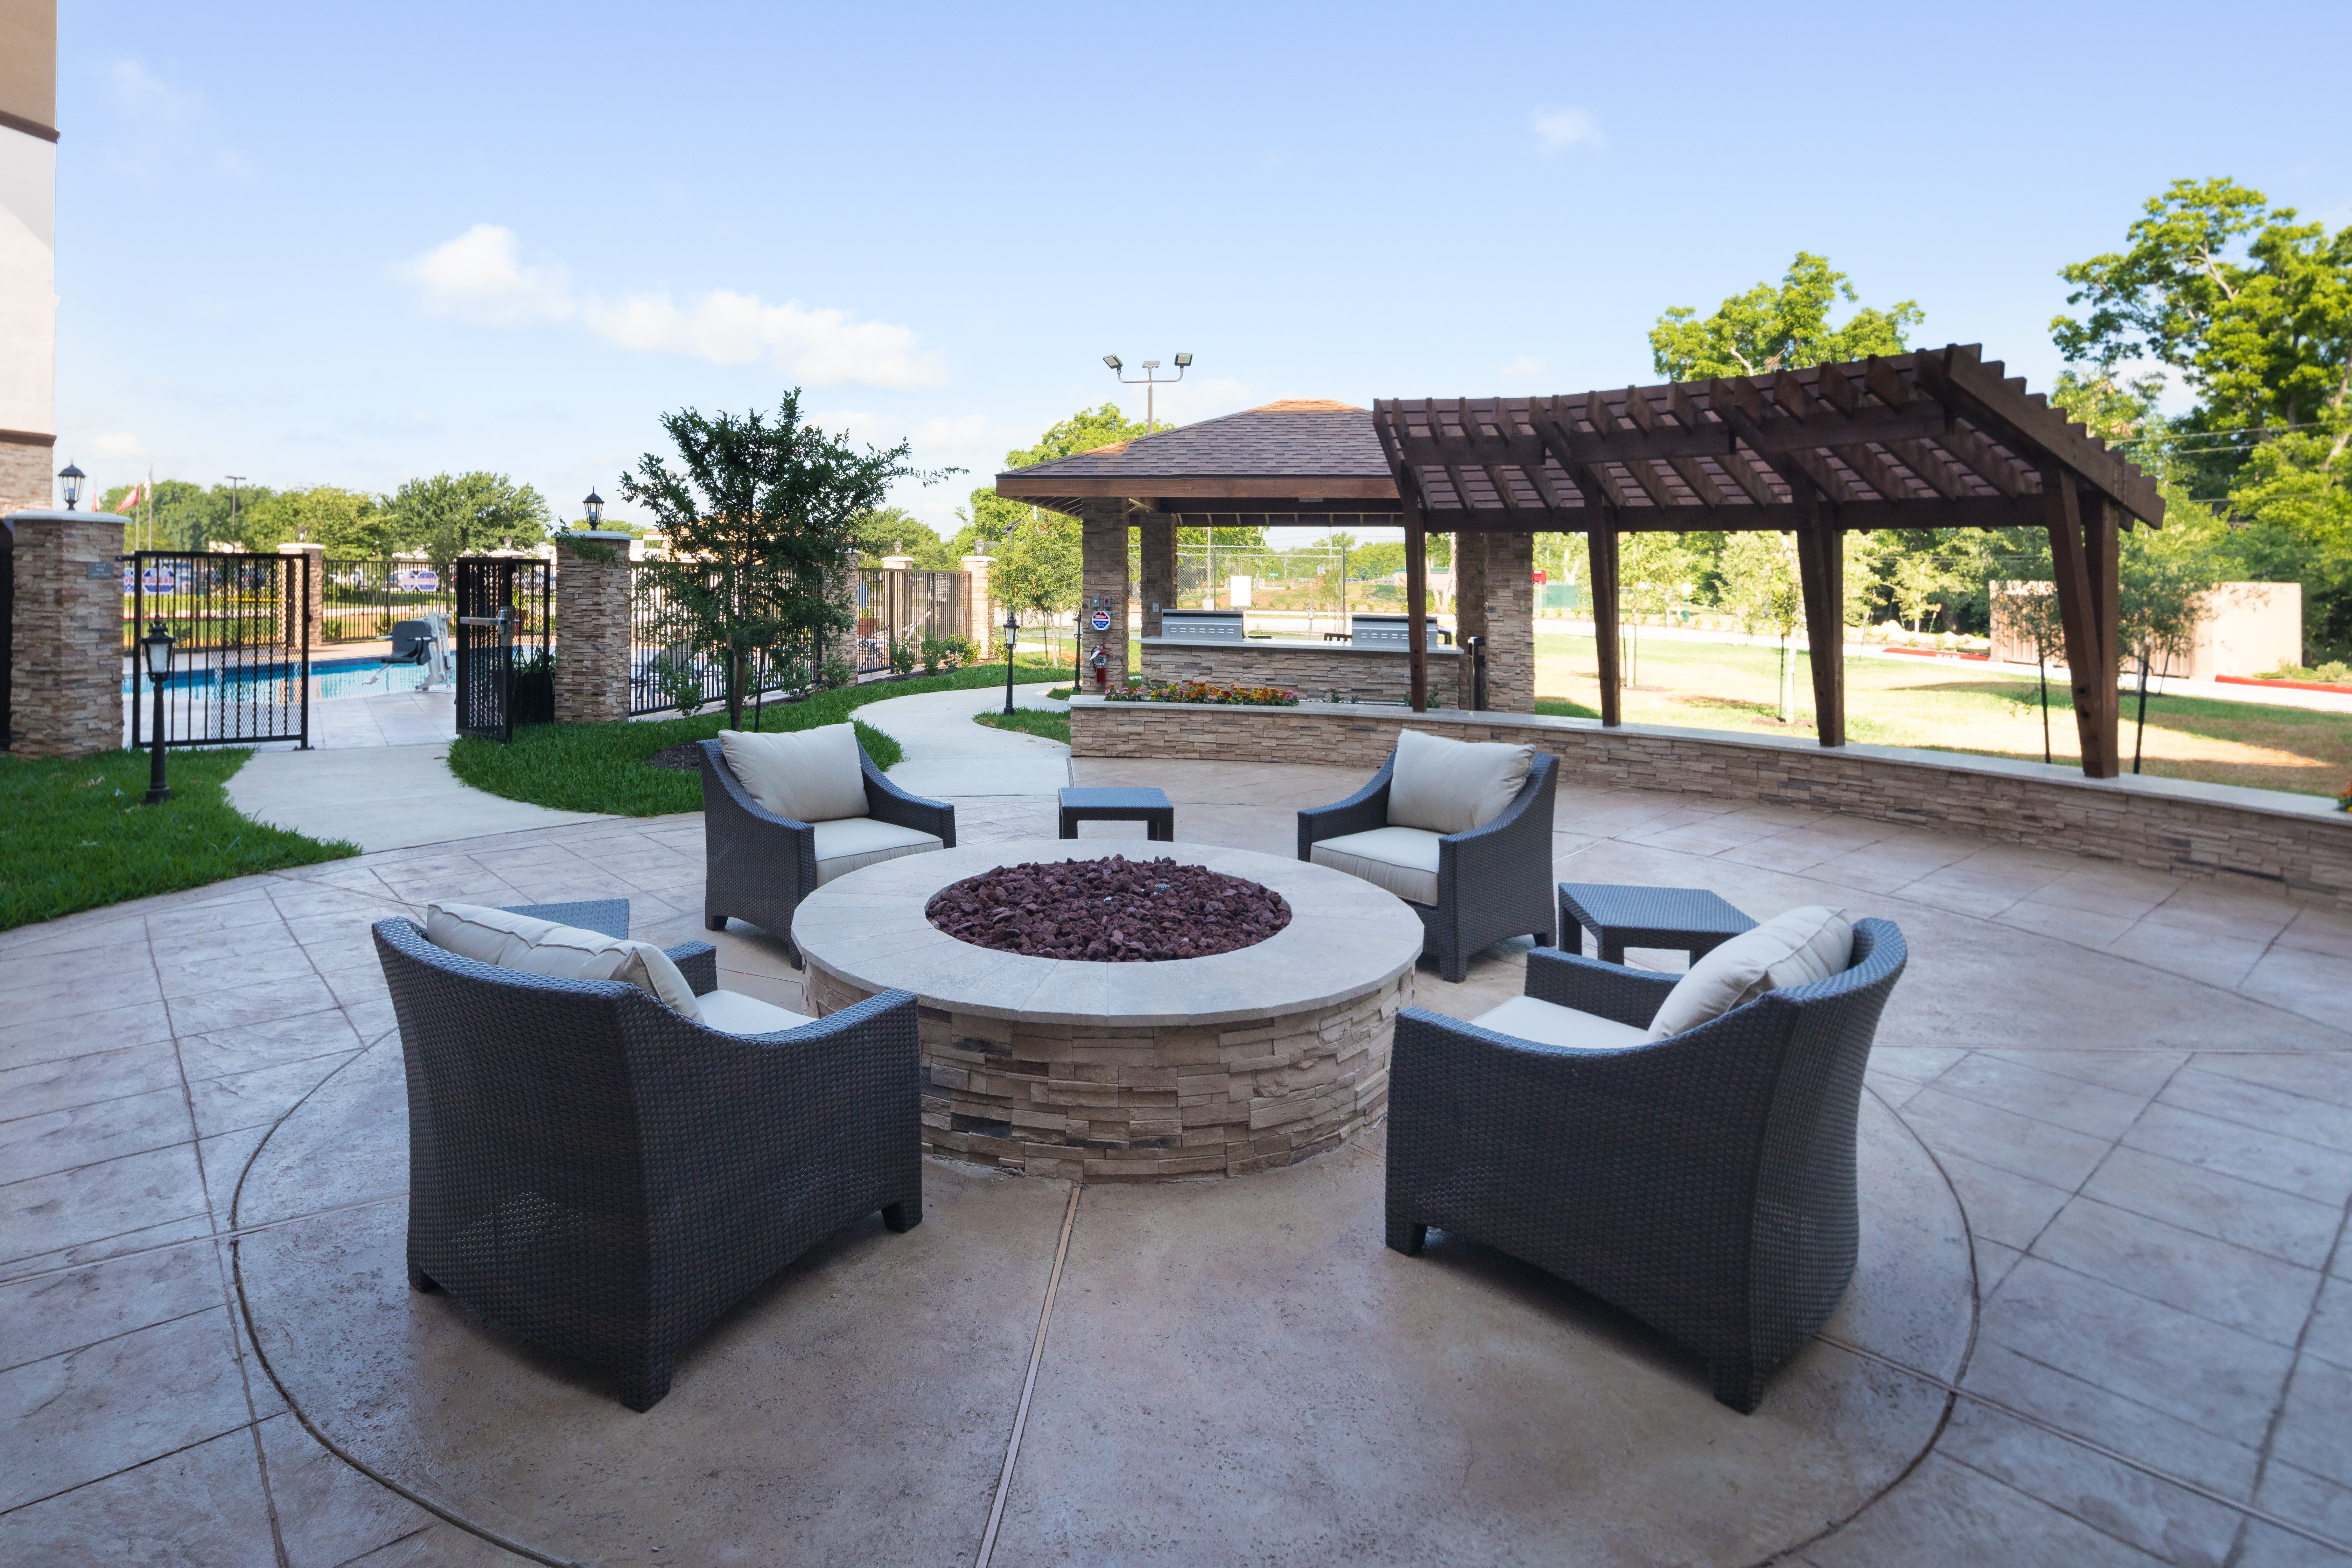 Enjoy the firepit at Staybridge Suites with friends and family